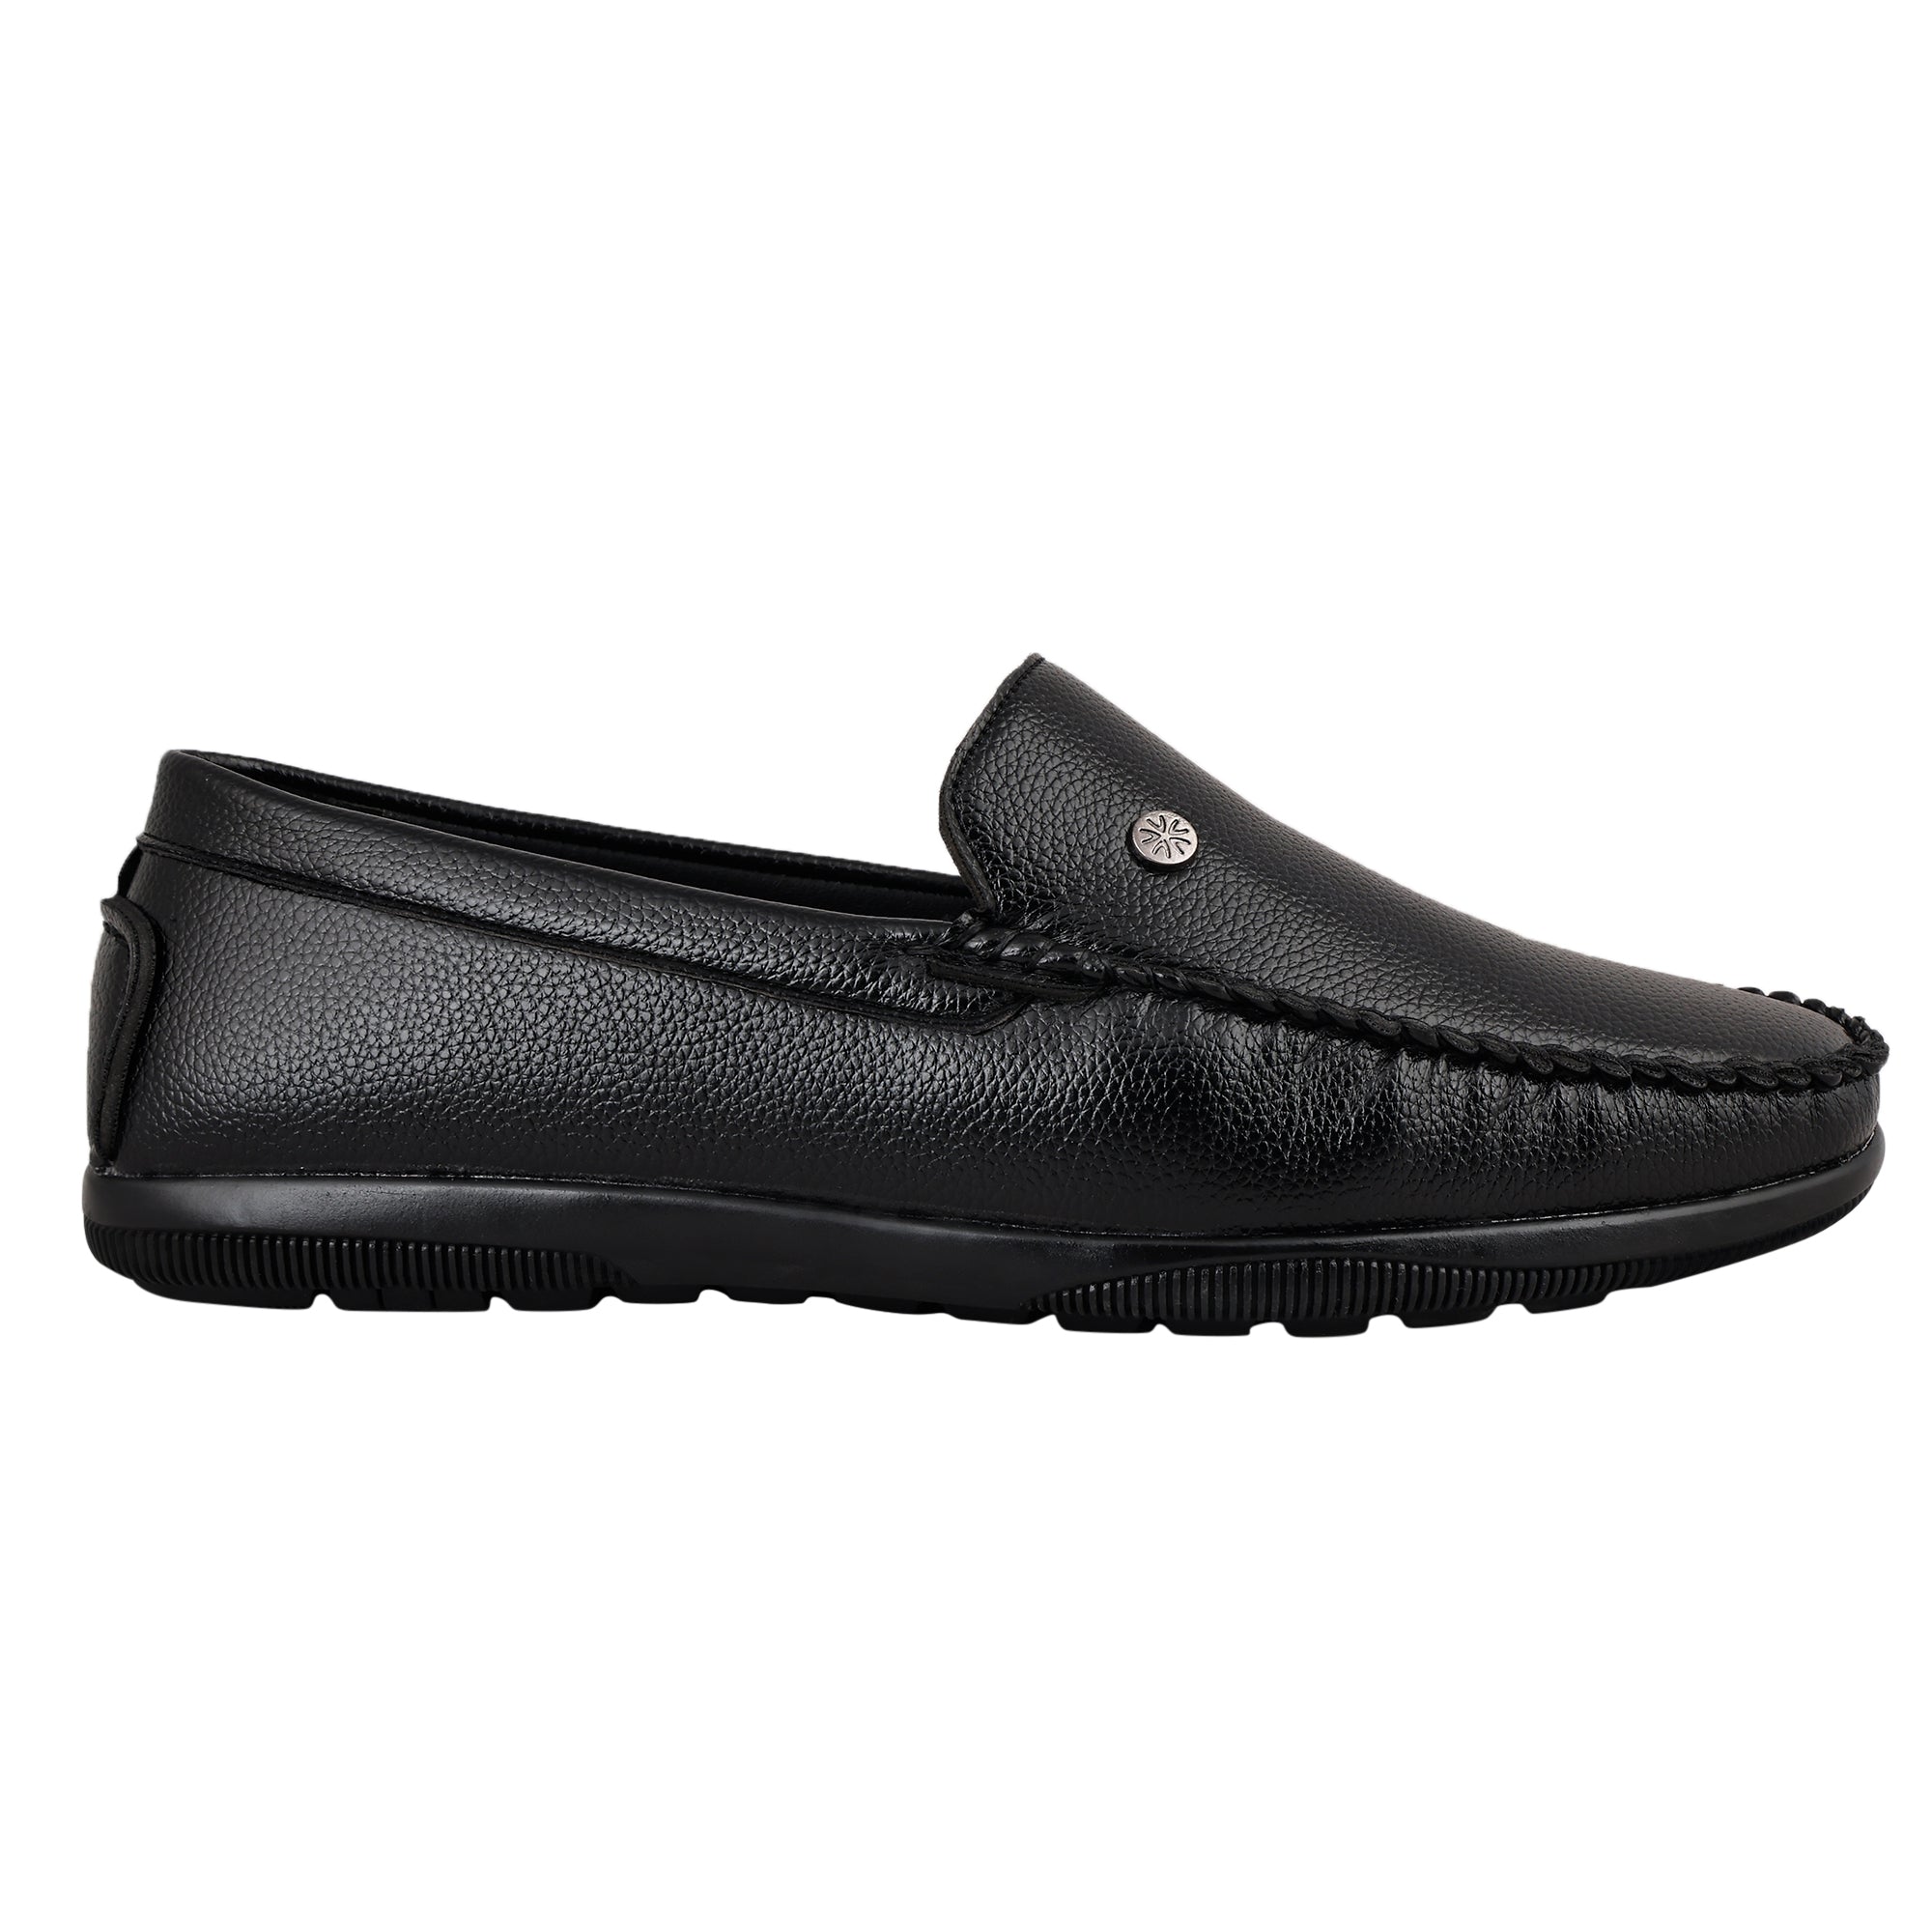 LB 45 Buckle Obsidian Black  Slip On Style Loafer Most Comfortable Doctor Insole With Wrinkle Free Fox Leather Loafers.